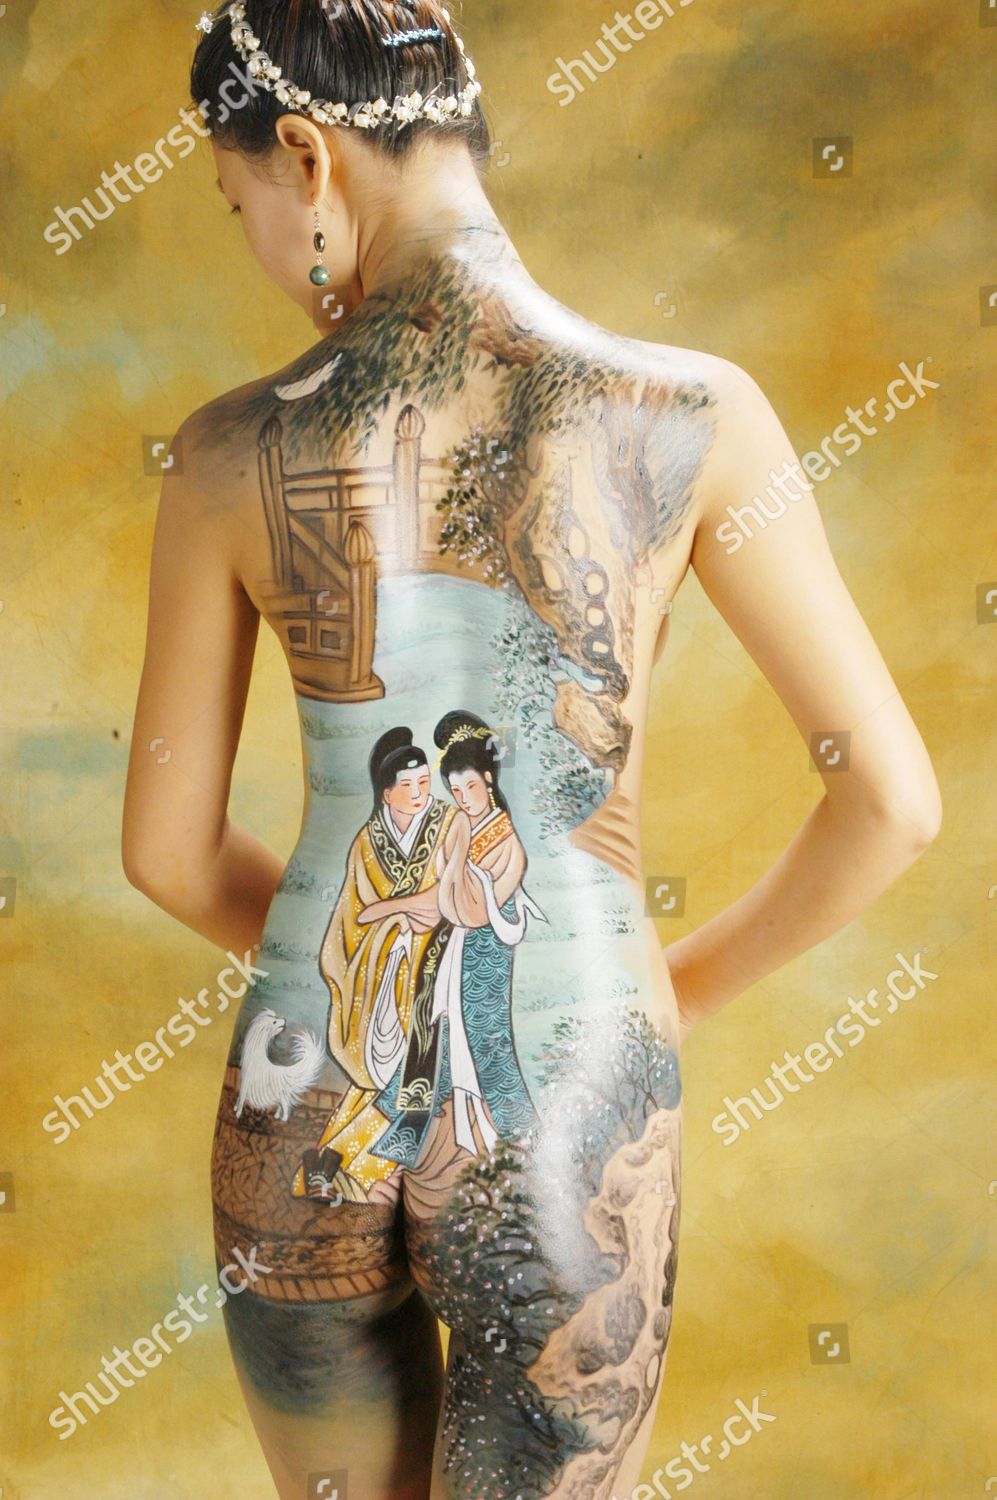 Model Whose Body Painted Scene Classic Chinese Editorial Stock Photo -  Stock Image | Shutterstock